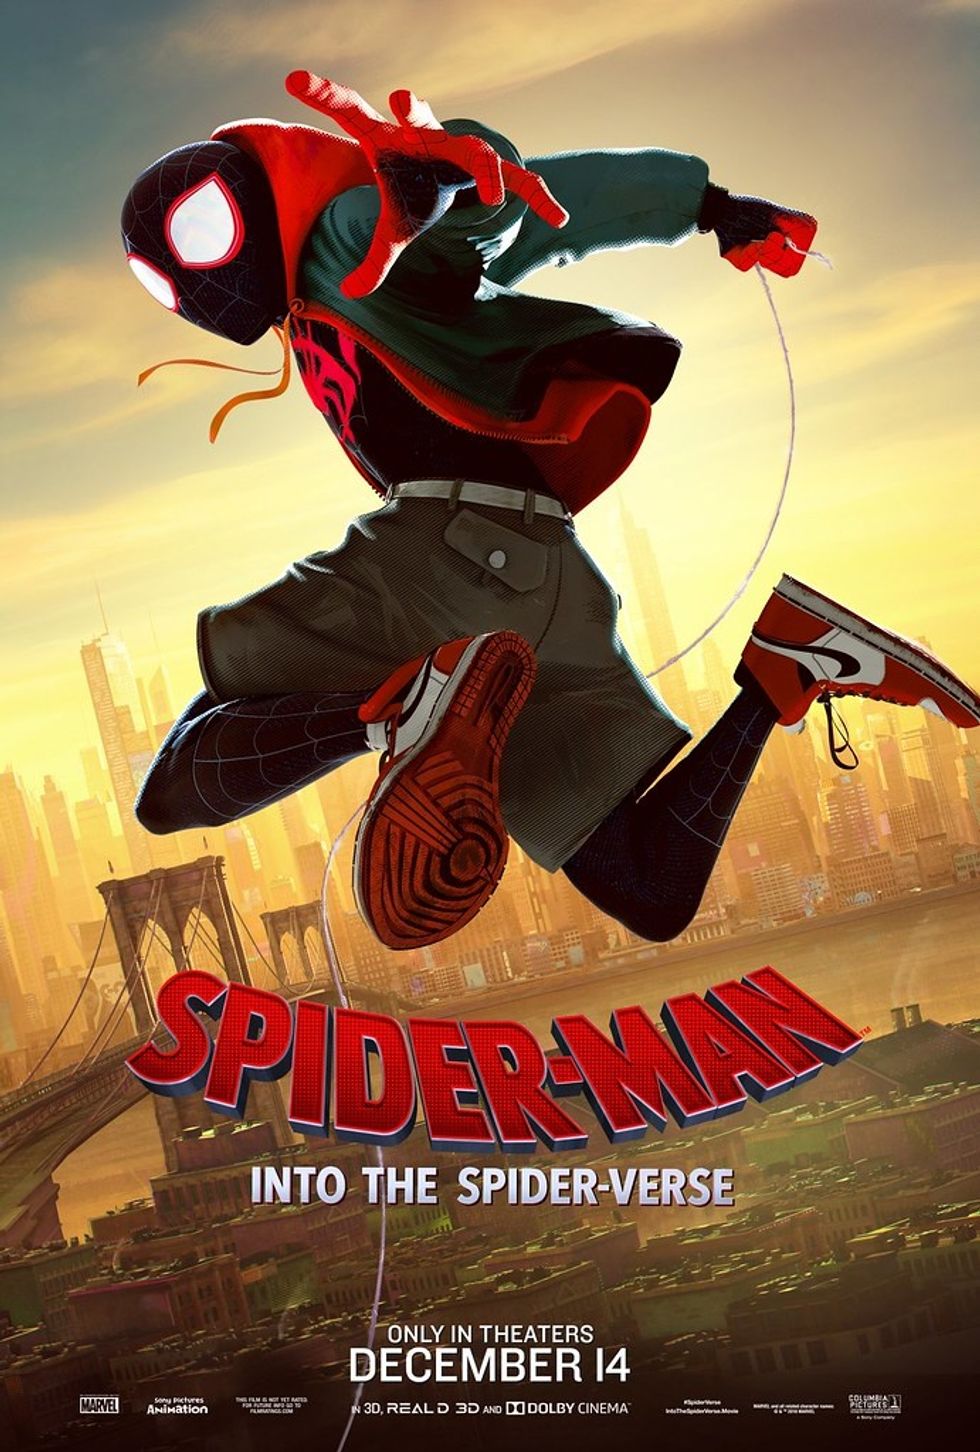 Let's Jump Into "Spider-Man: Into The Spider-Verse"